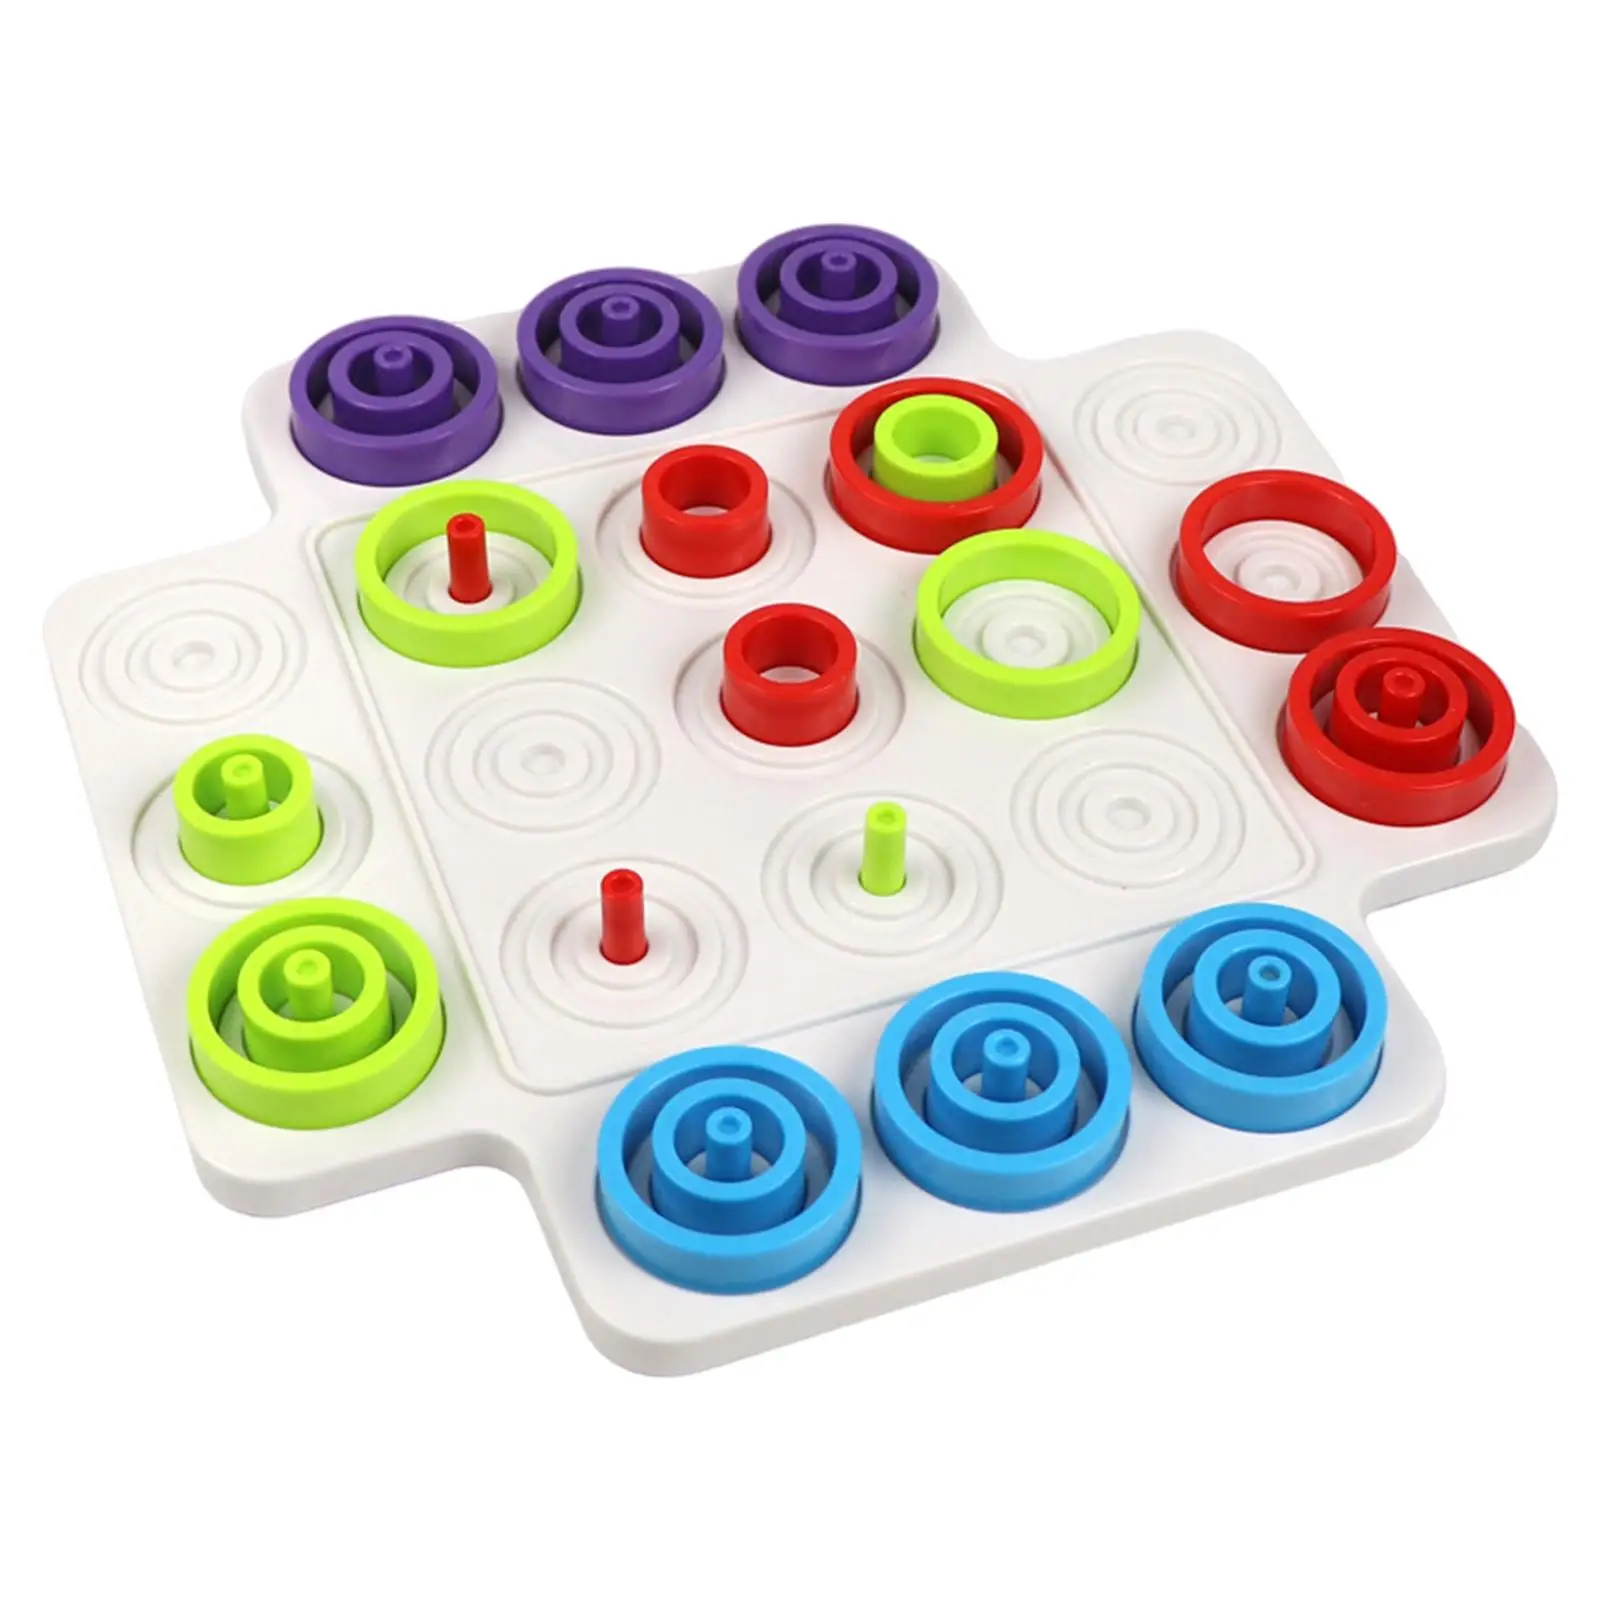 Rings Chess Puzzle Toys Educational Parent Child Interaction for